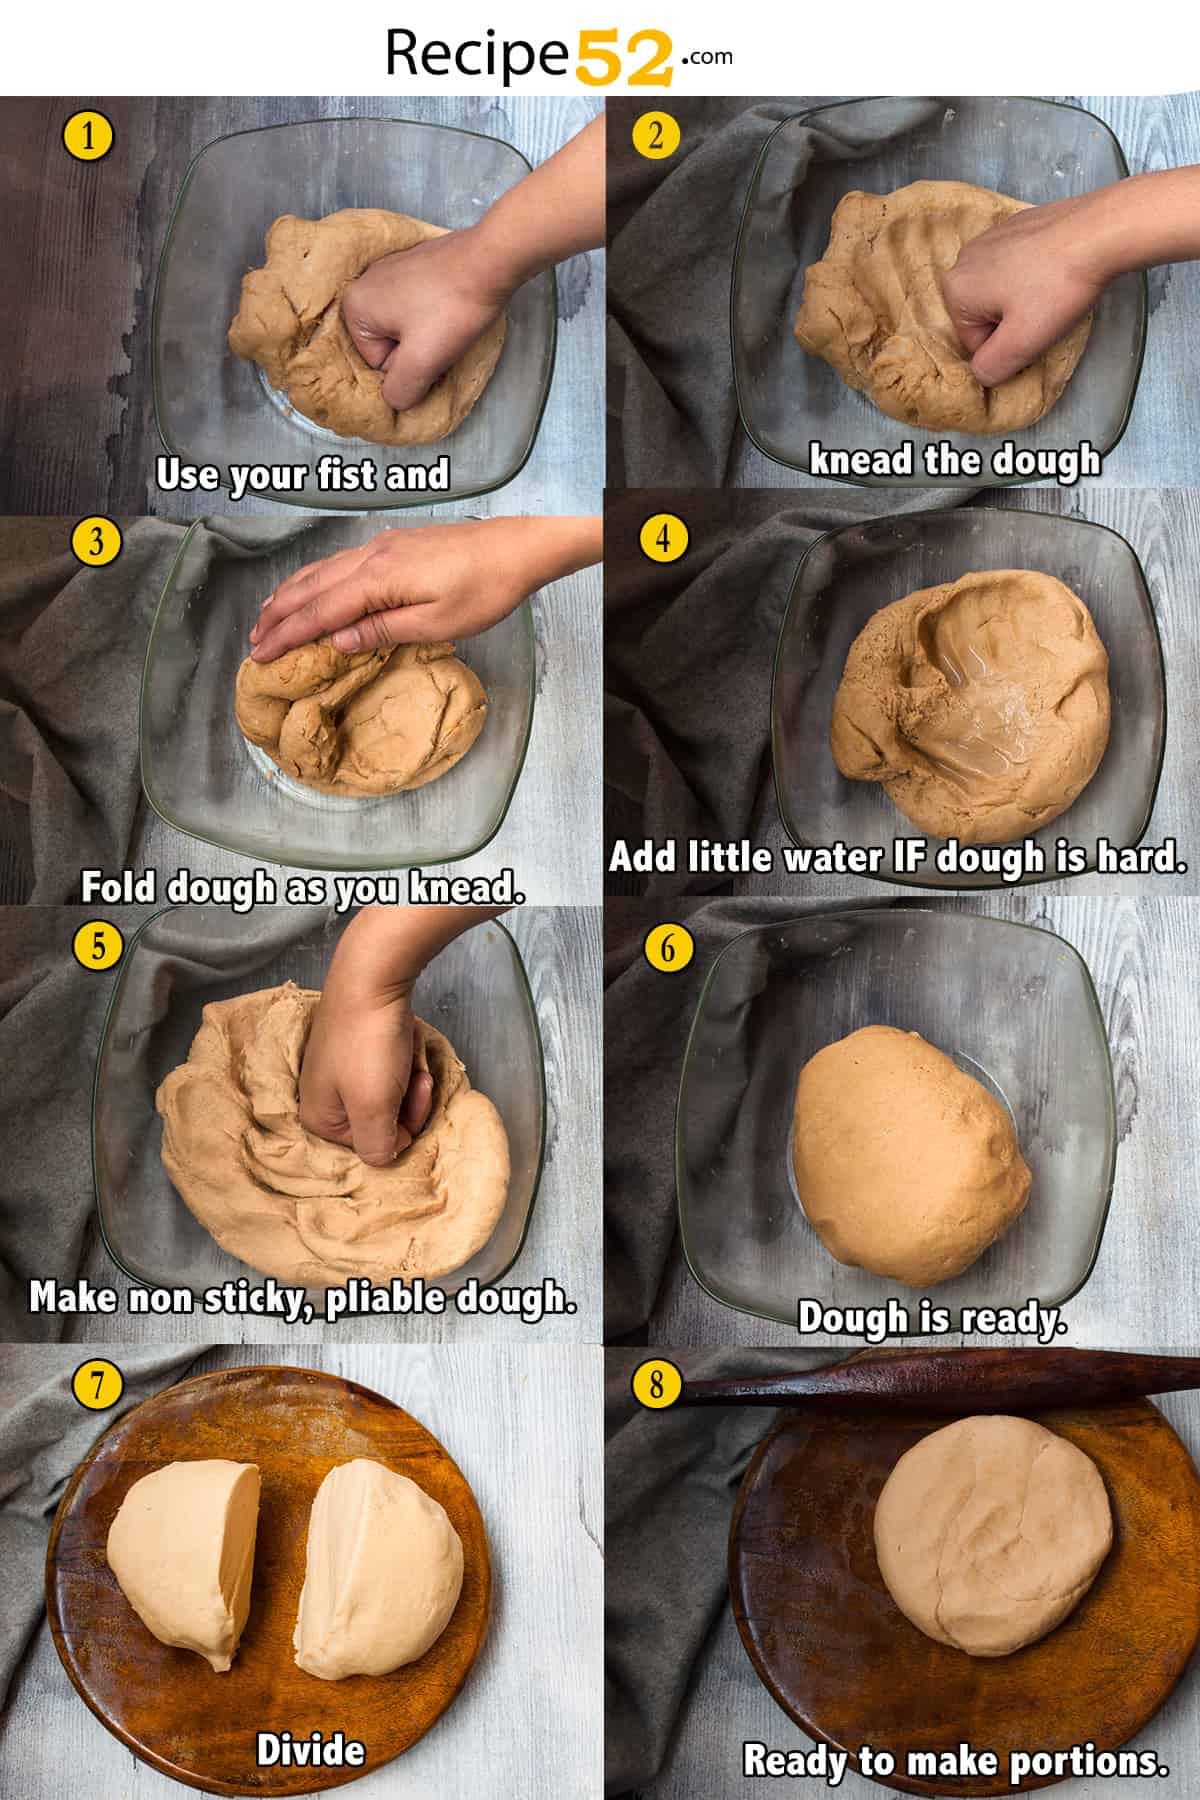 A collage of steps to knead dough.